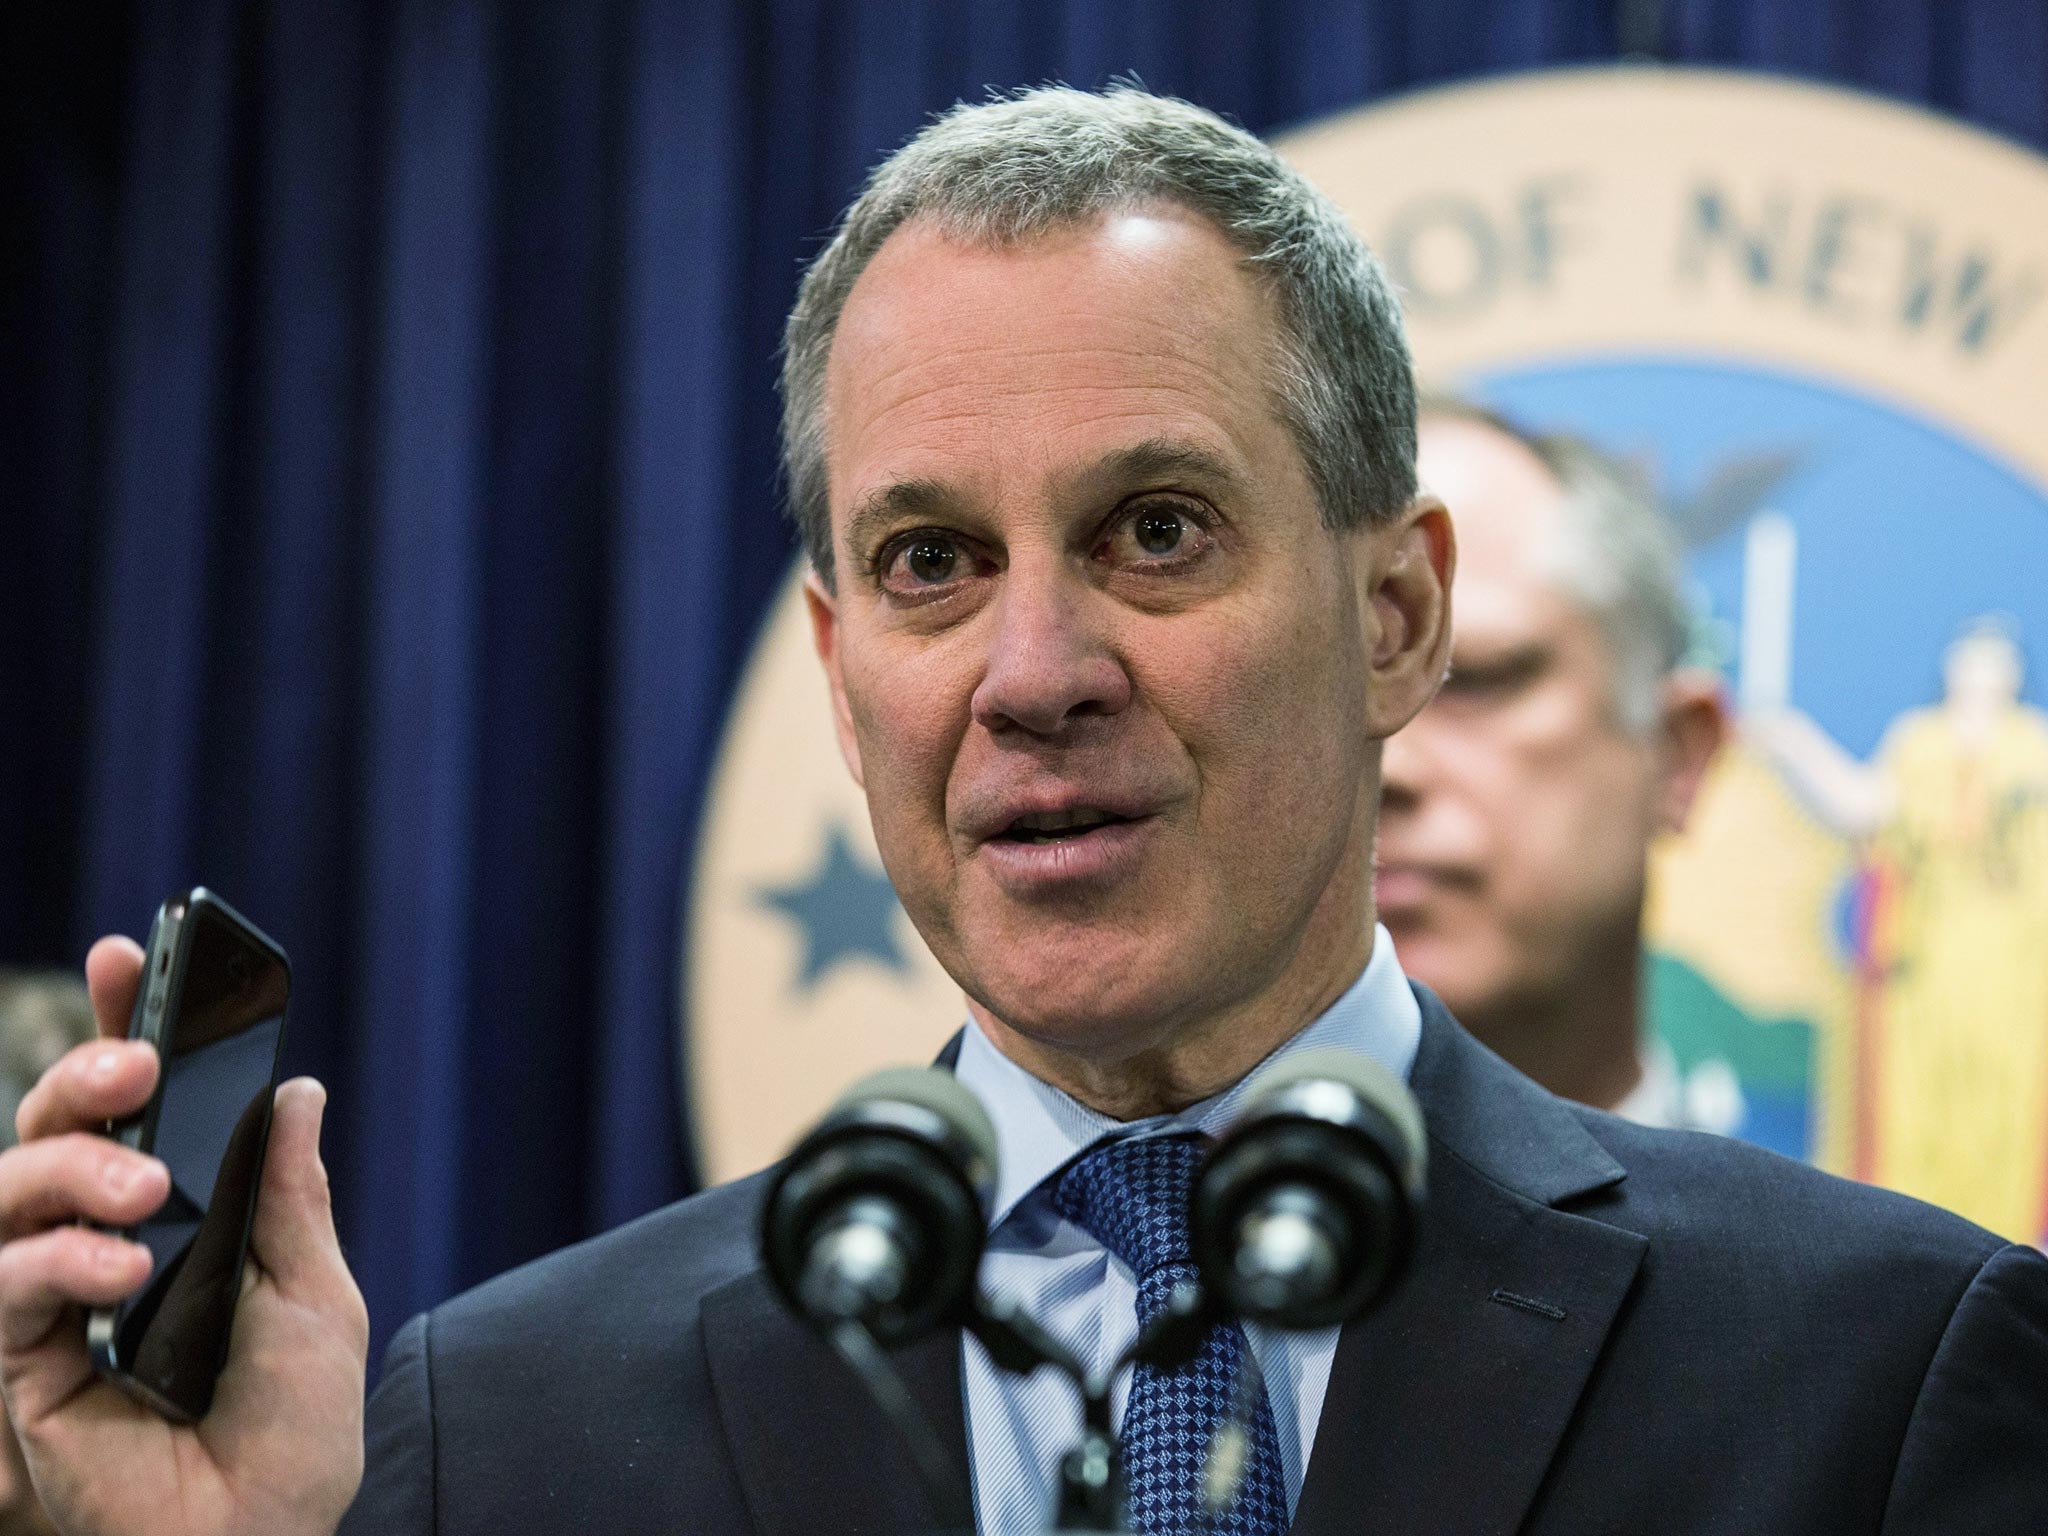 The New York State Attorney General, Eric Schneiderman, wrote last month that companies such as Airbnb were “cyber cowboys”